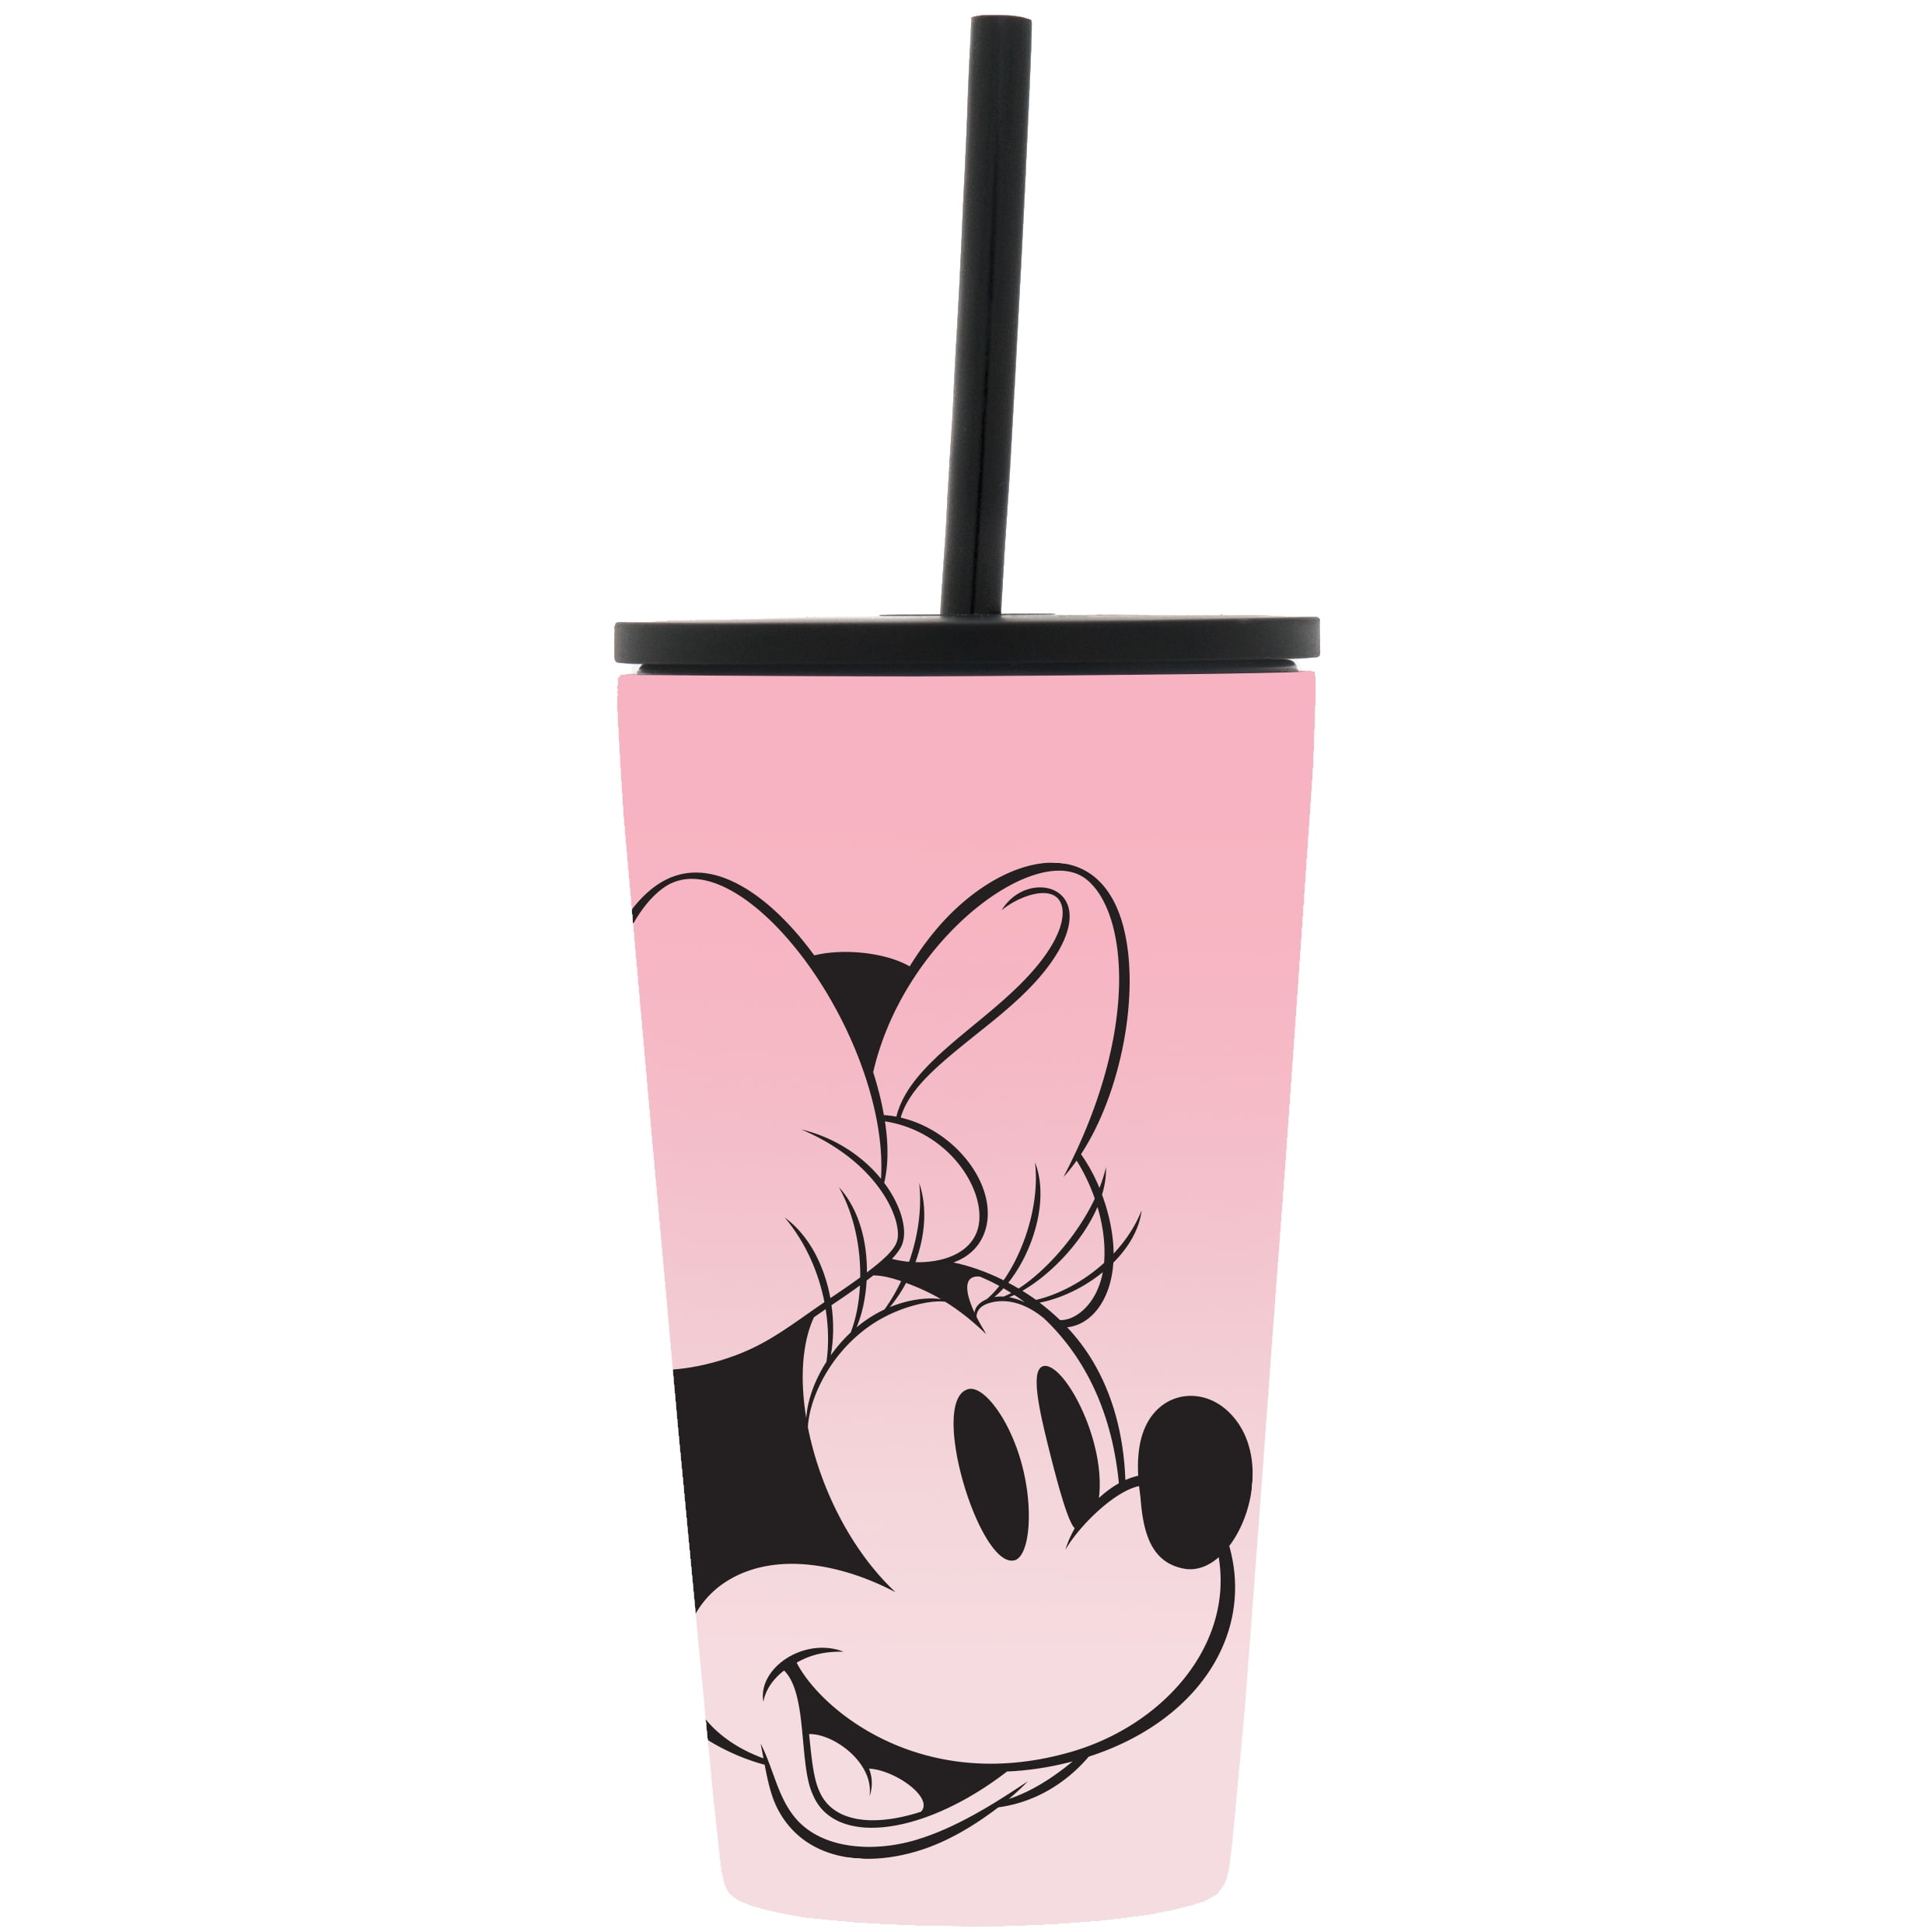 😍 Another tumbler to add to my collection! This new Minnie Mouse tumbler  from Simple Modern is 32oz and is just the cutest! I love the…